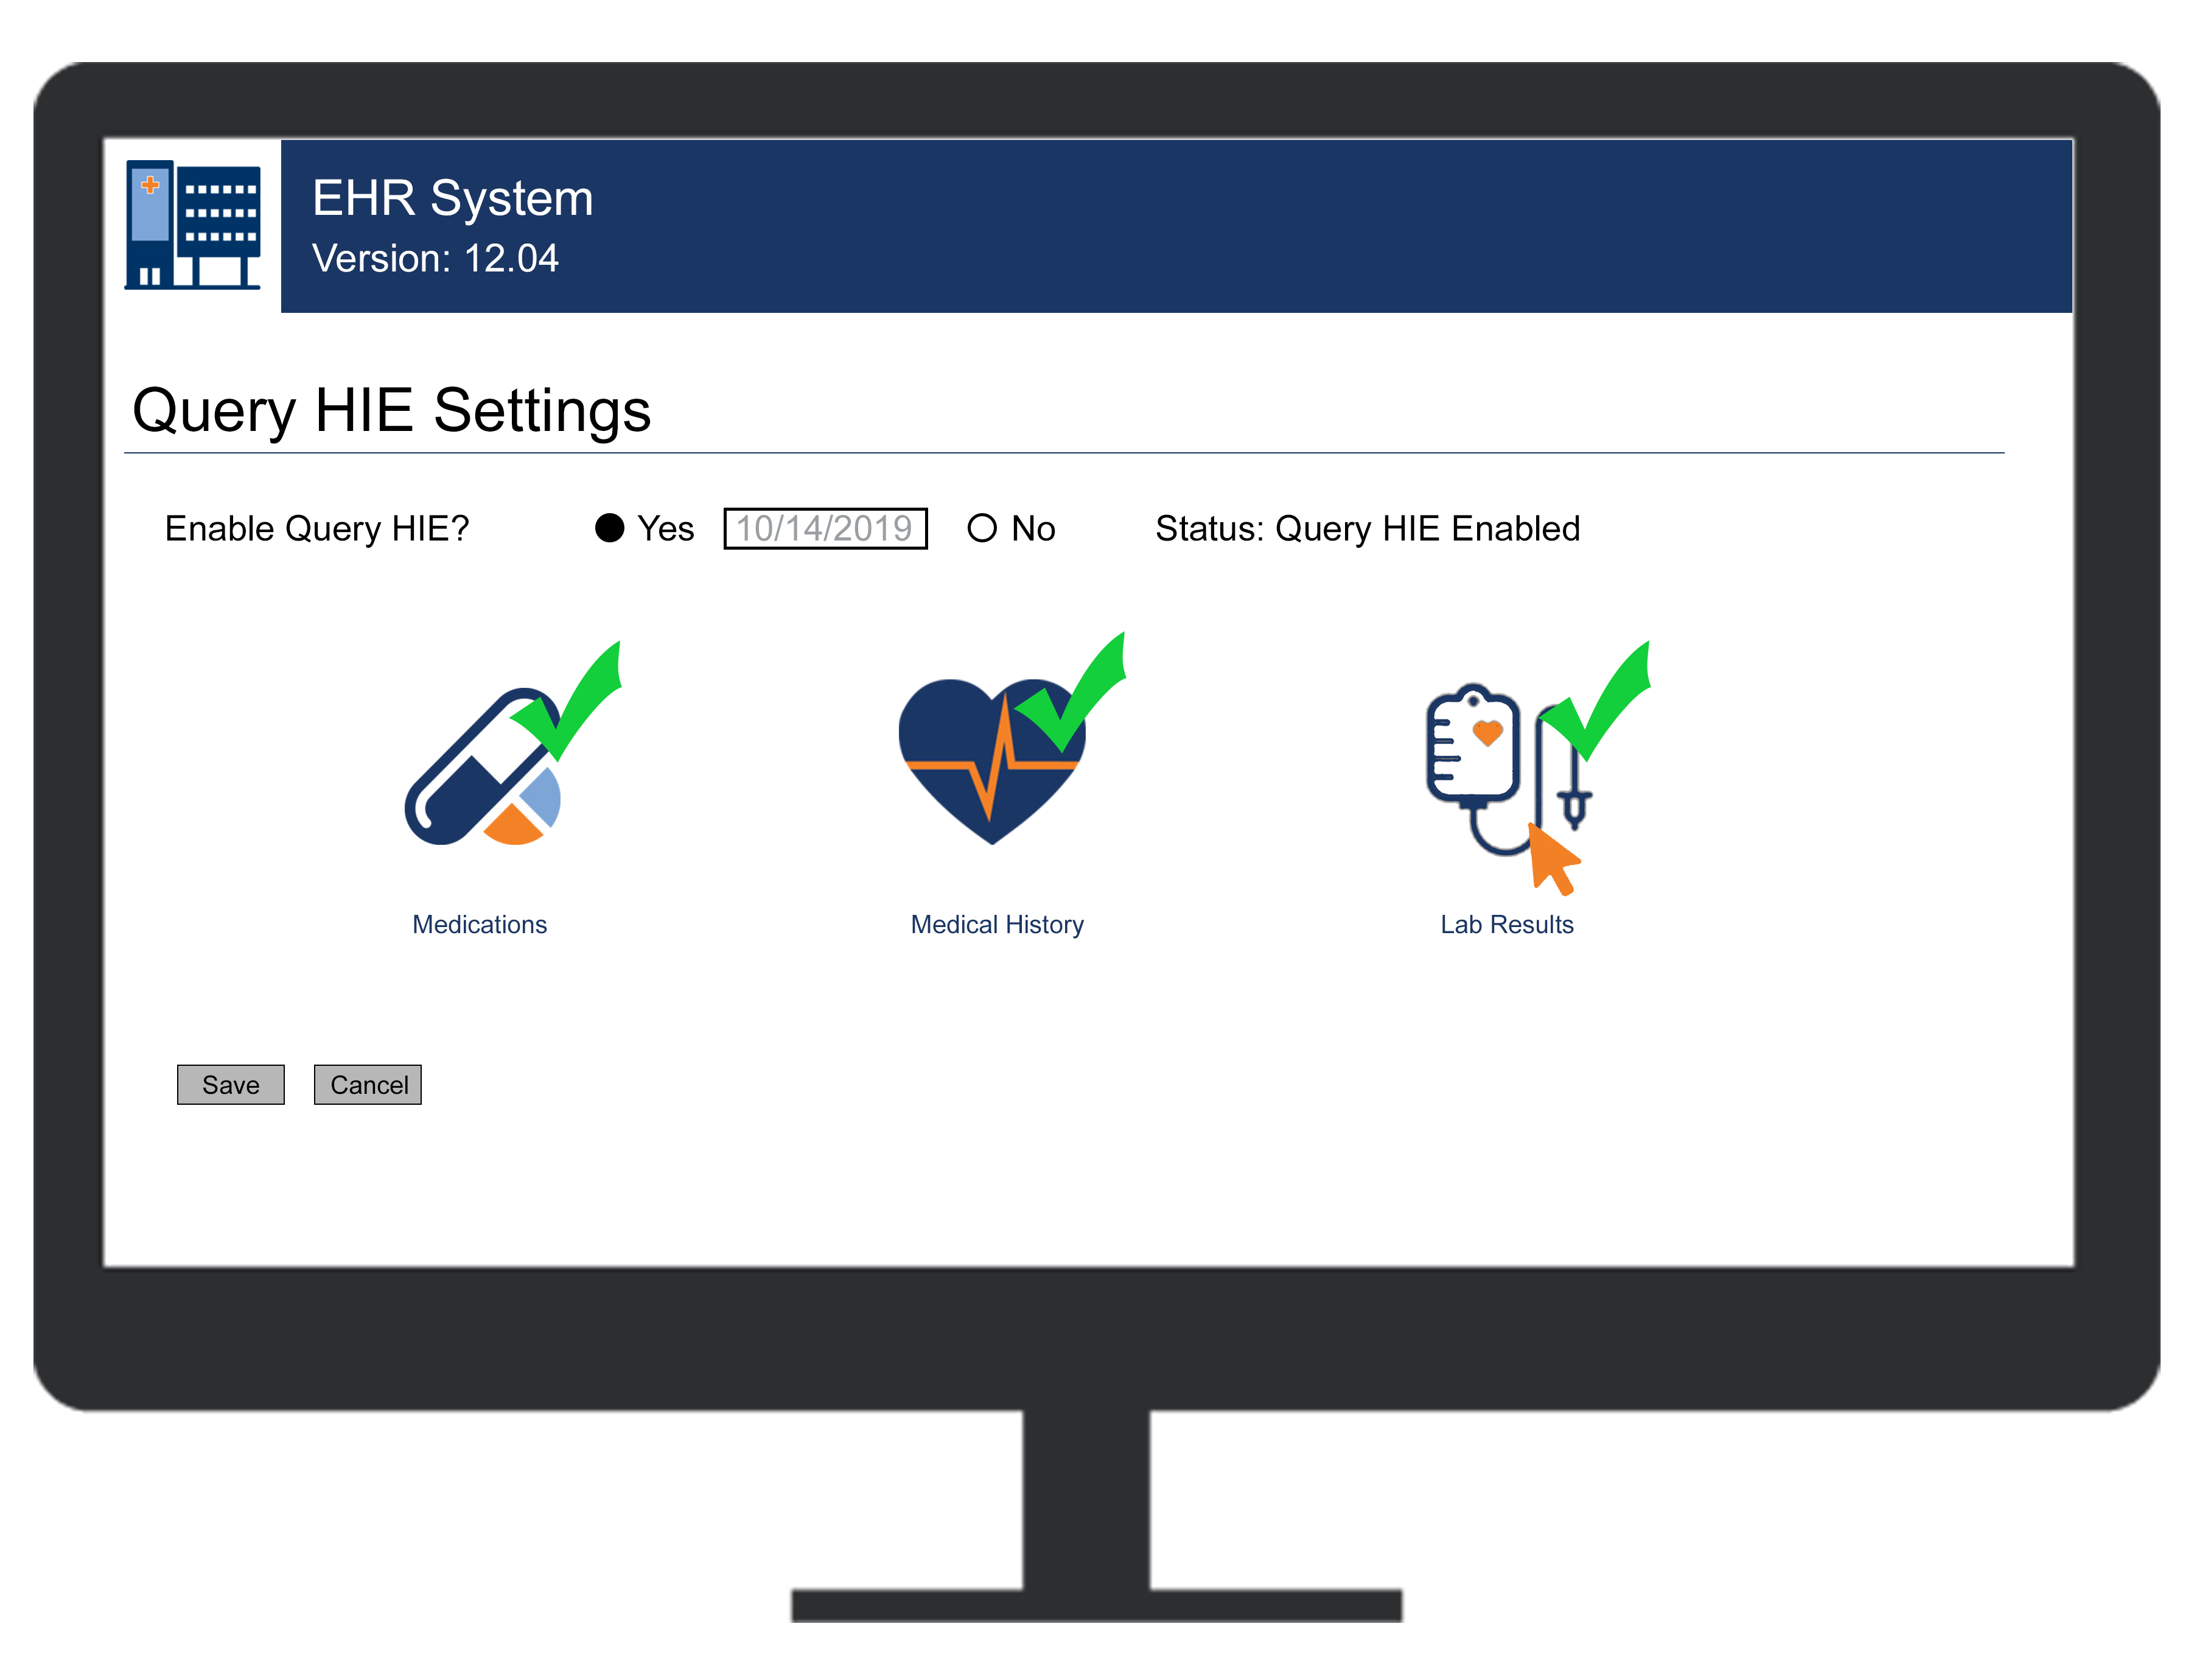 Example of an information access screen in an EHR system